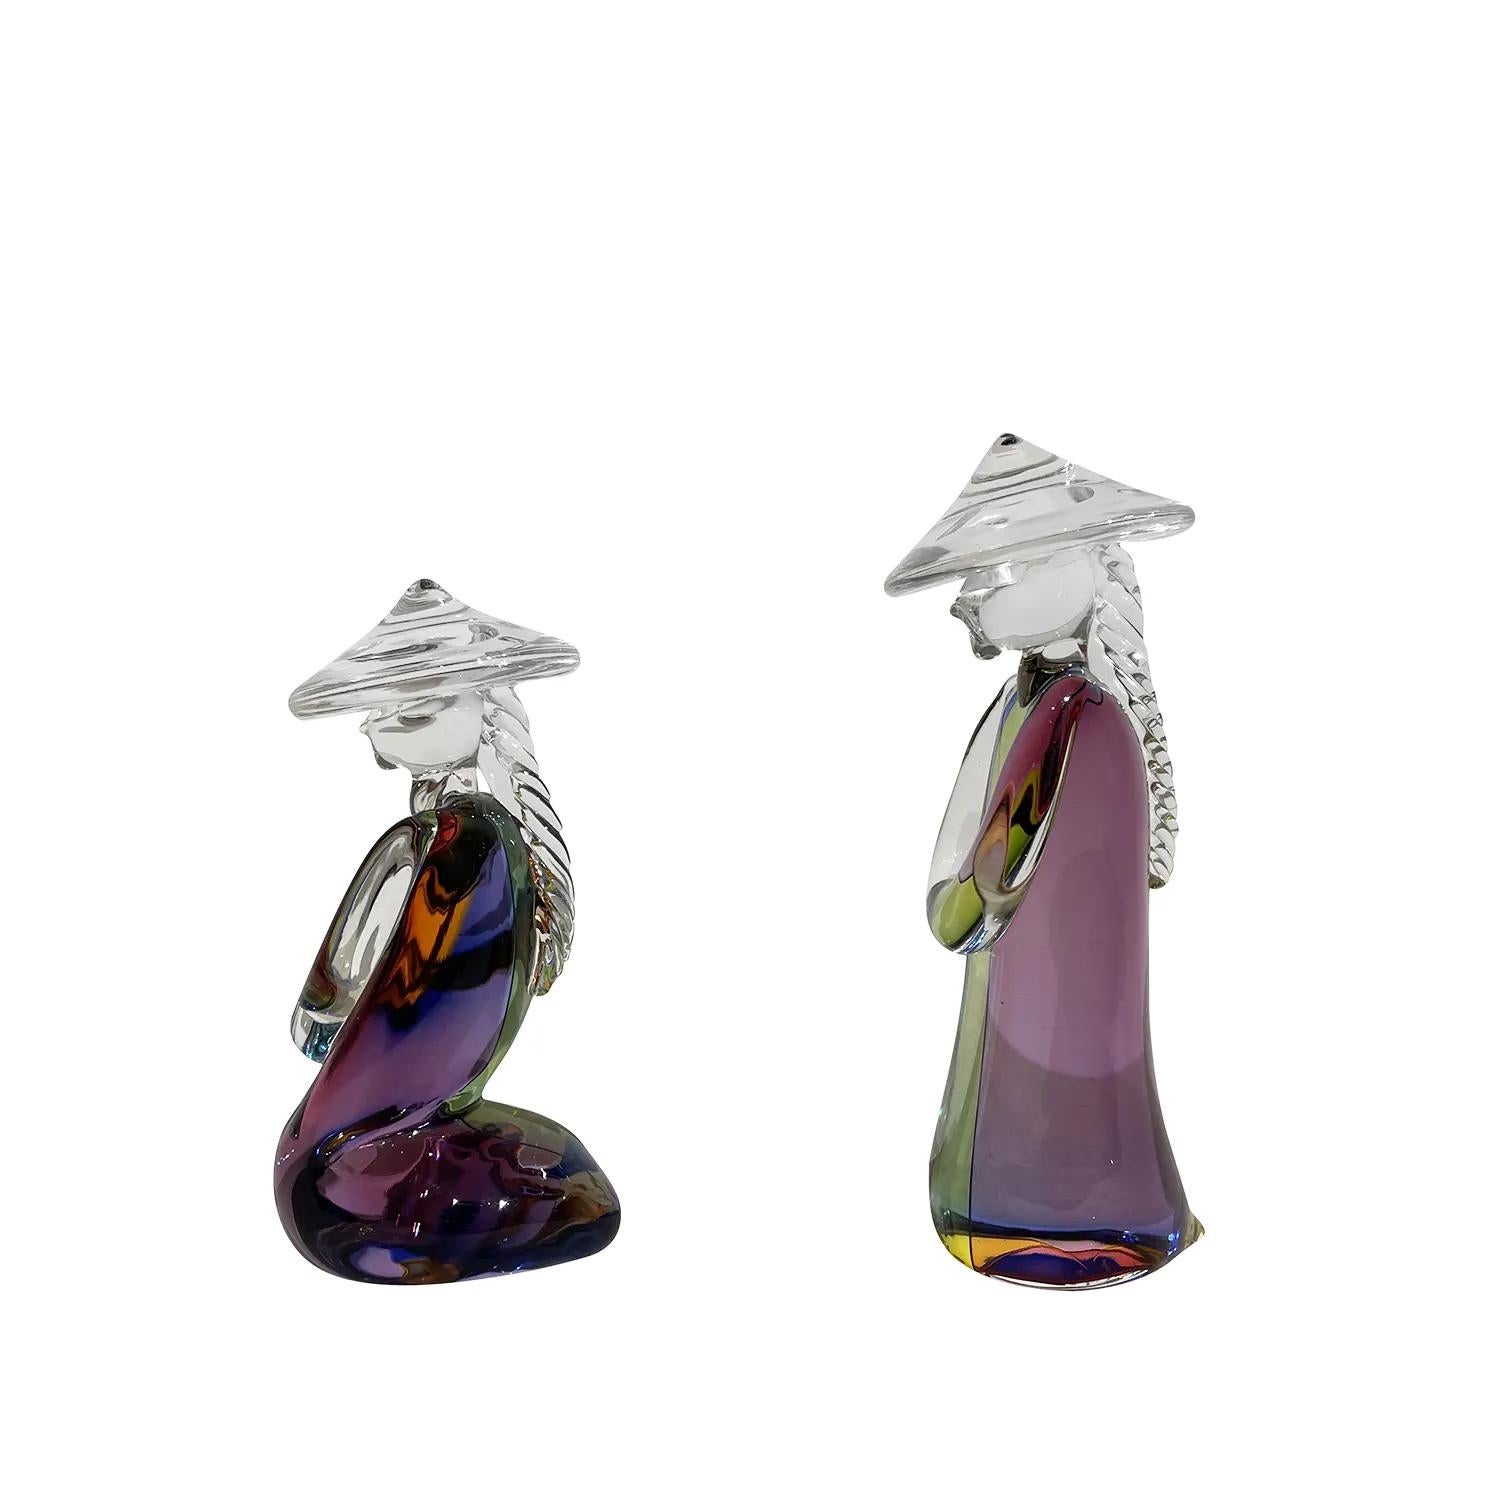 20th Century Italian Pair of Murano Glass Japanese Farmers by Archimede Seguso In Good Condition For Sale In West Palm Beach, FL